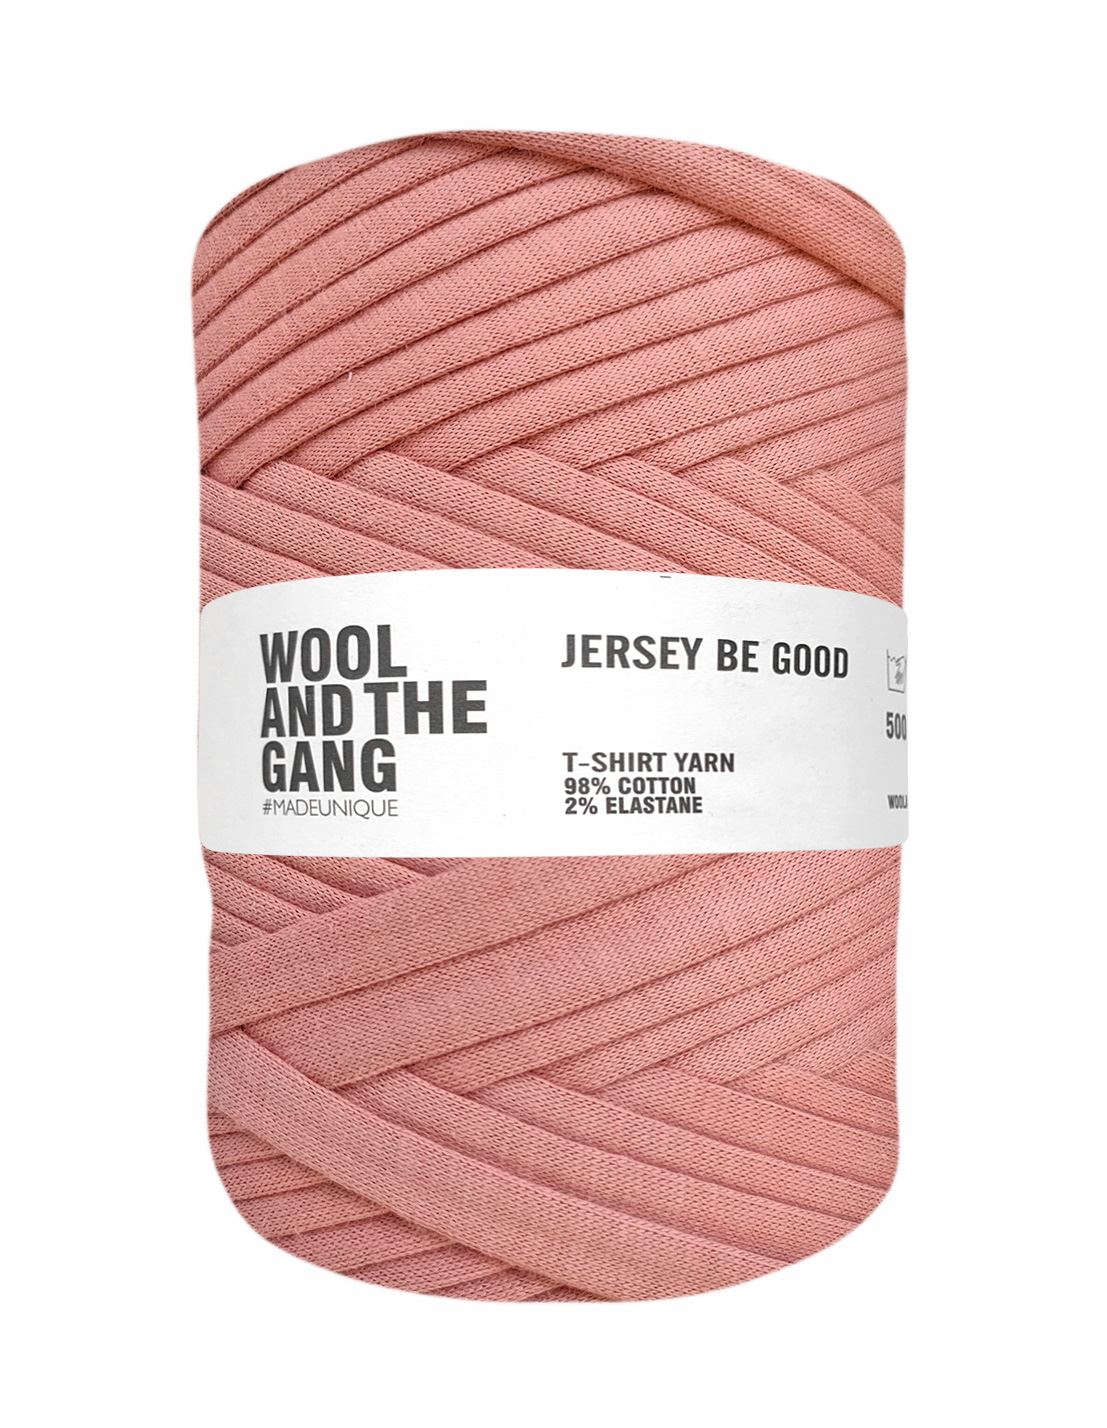 Dusty Rose Jersey Be Good t-shirt yarn by Wool and the Gang (500g)